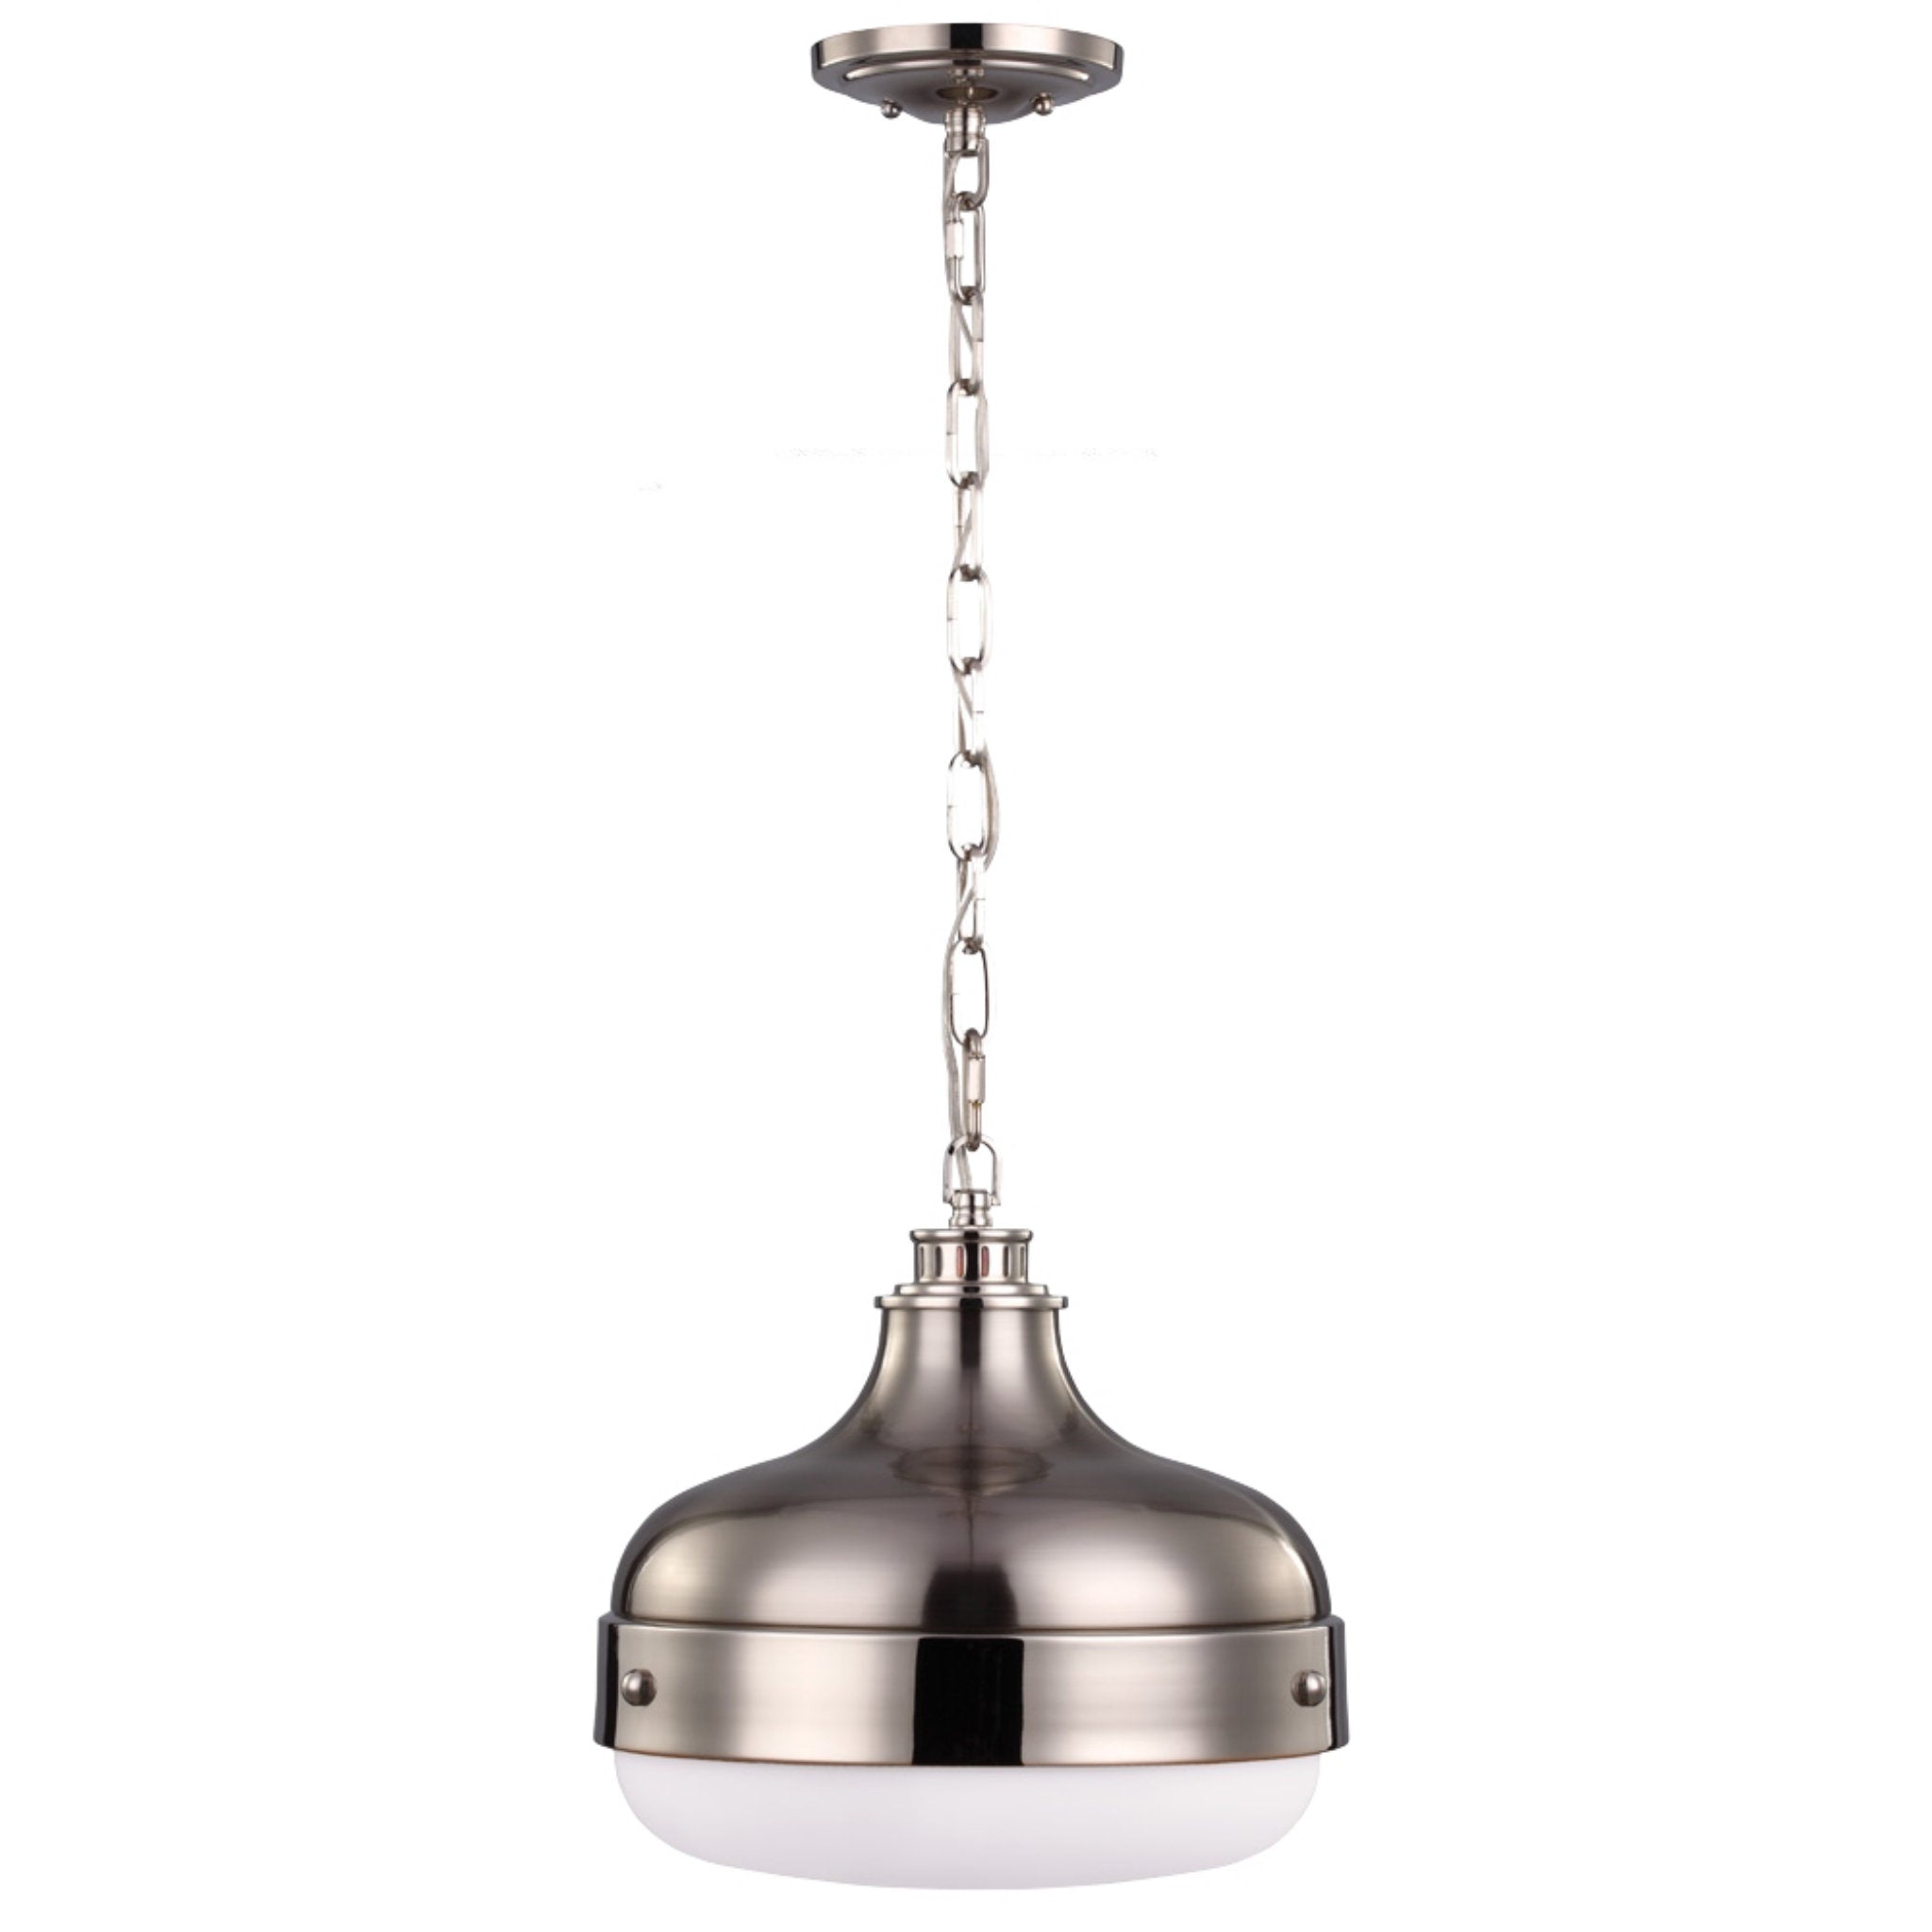 Cadence Pendant Period Inspired 13.125" Height Steel Round White Opal Etched Shade in Polished Nickel / Brushed